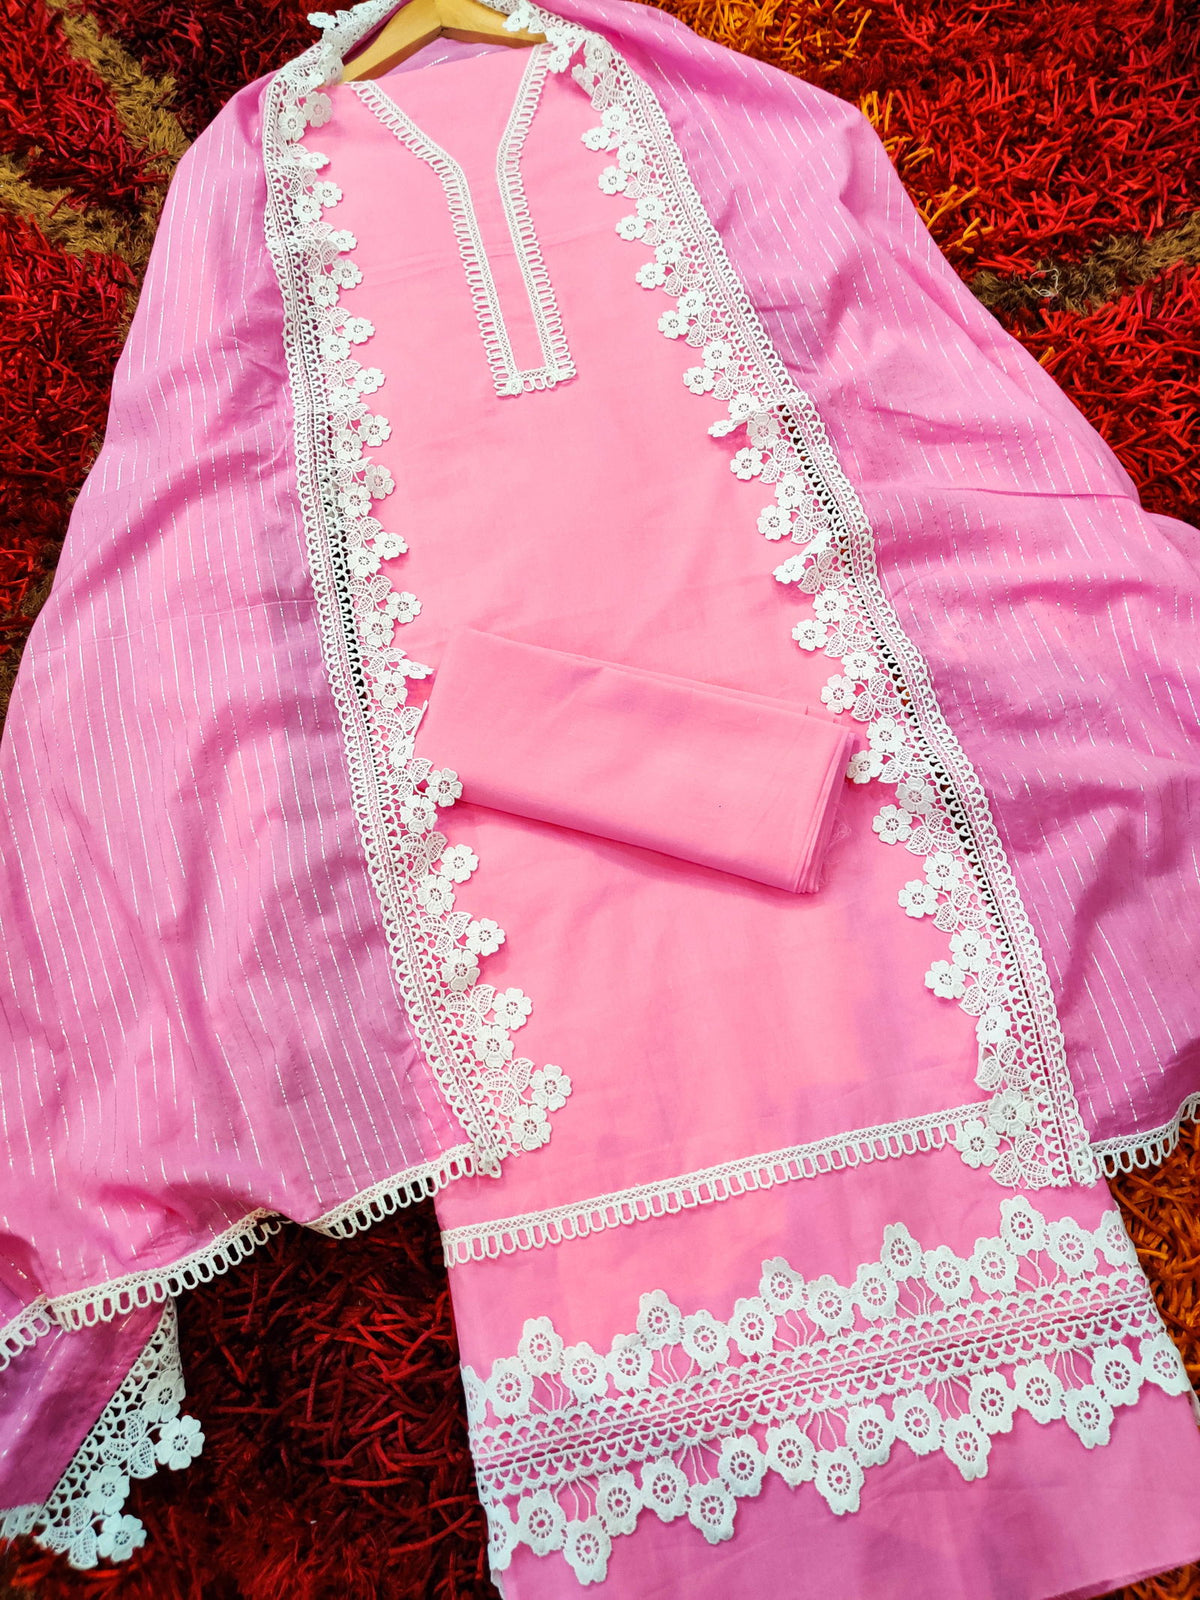 Pink Cotton Adorned with Elegant White Lace Unstitched Dress Material Suit Set - Mom & You Clothing